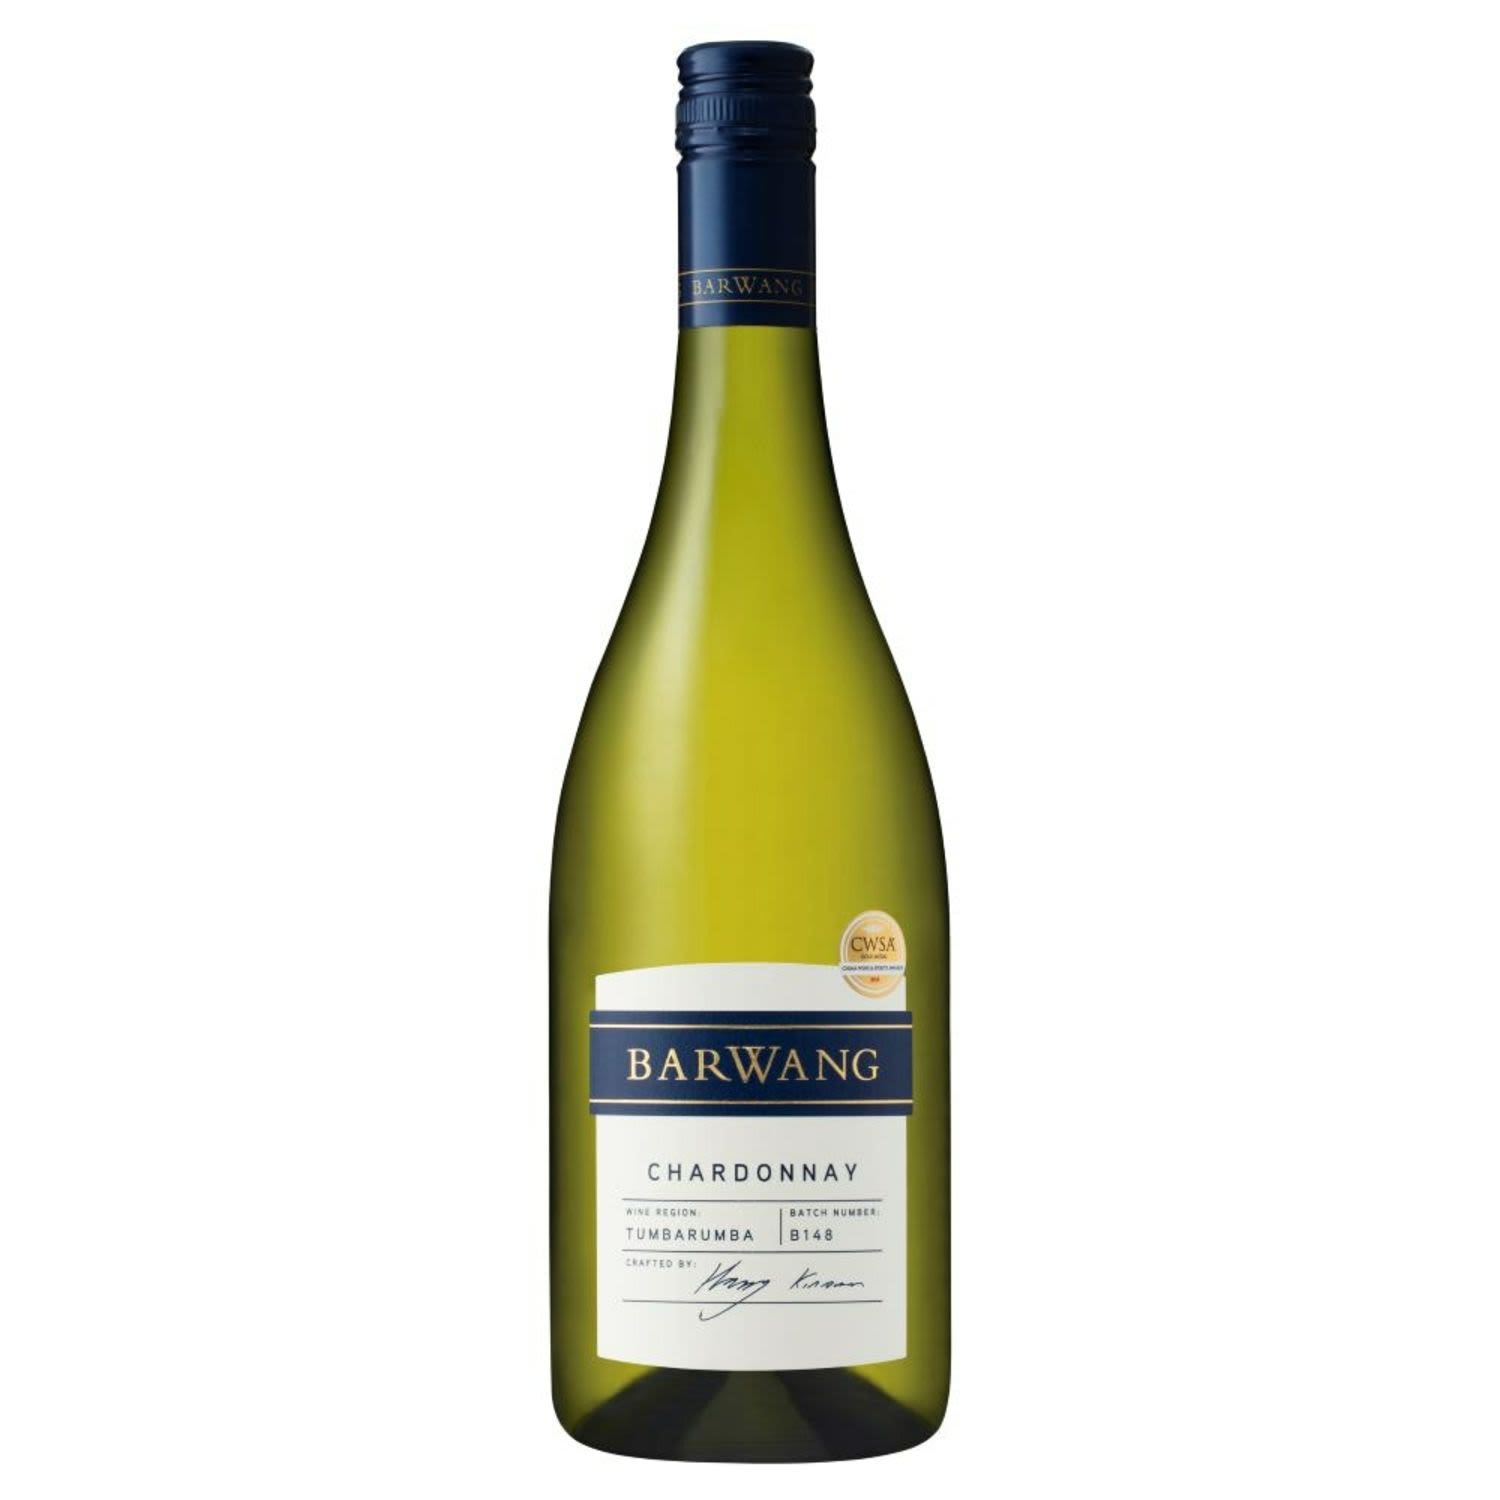 An aromatic Chardonnay, this wine delivers fresh rockmelon flavours with hints of tropical fruits, complemented by great structure and a lingering finish.<br /> <br />Alcohol Volume: 13.50%<br /><br />Pack Format: Bottle<br /><br />Standard Drinks: 8</br /><br />Pack Type: Bottle<br /><br />Country of Origin: Australia<br /><br />Region: Tumbarumba<br /><br />Vintage: Vintages Vary<br />